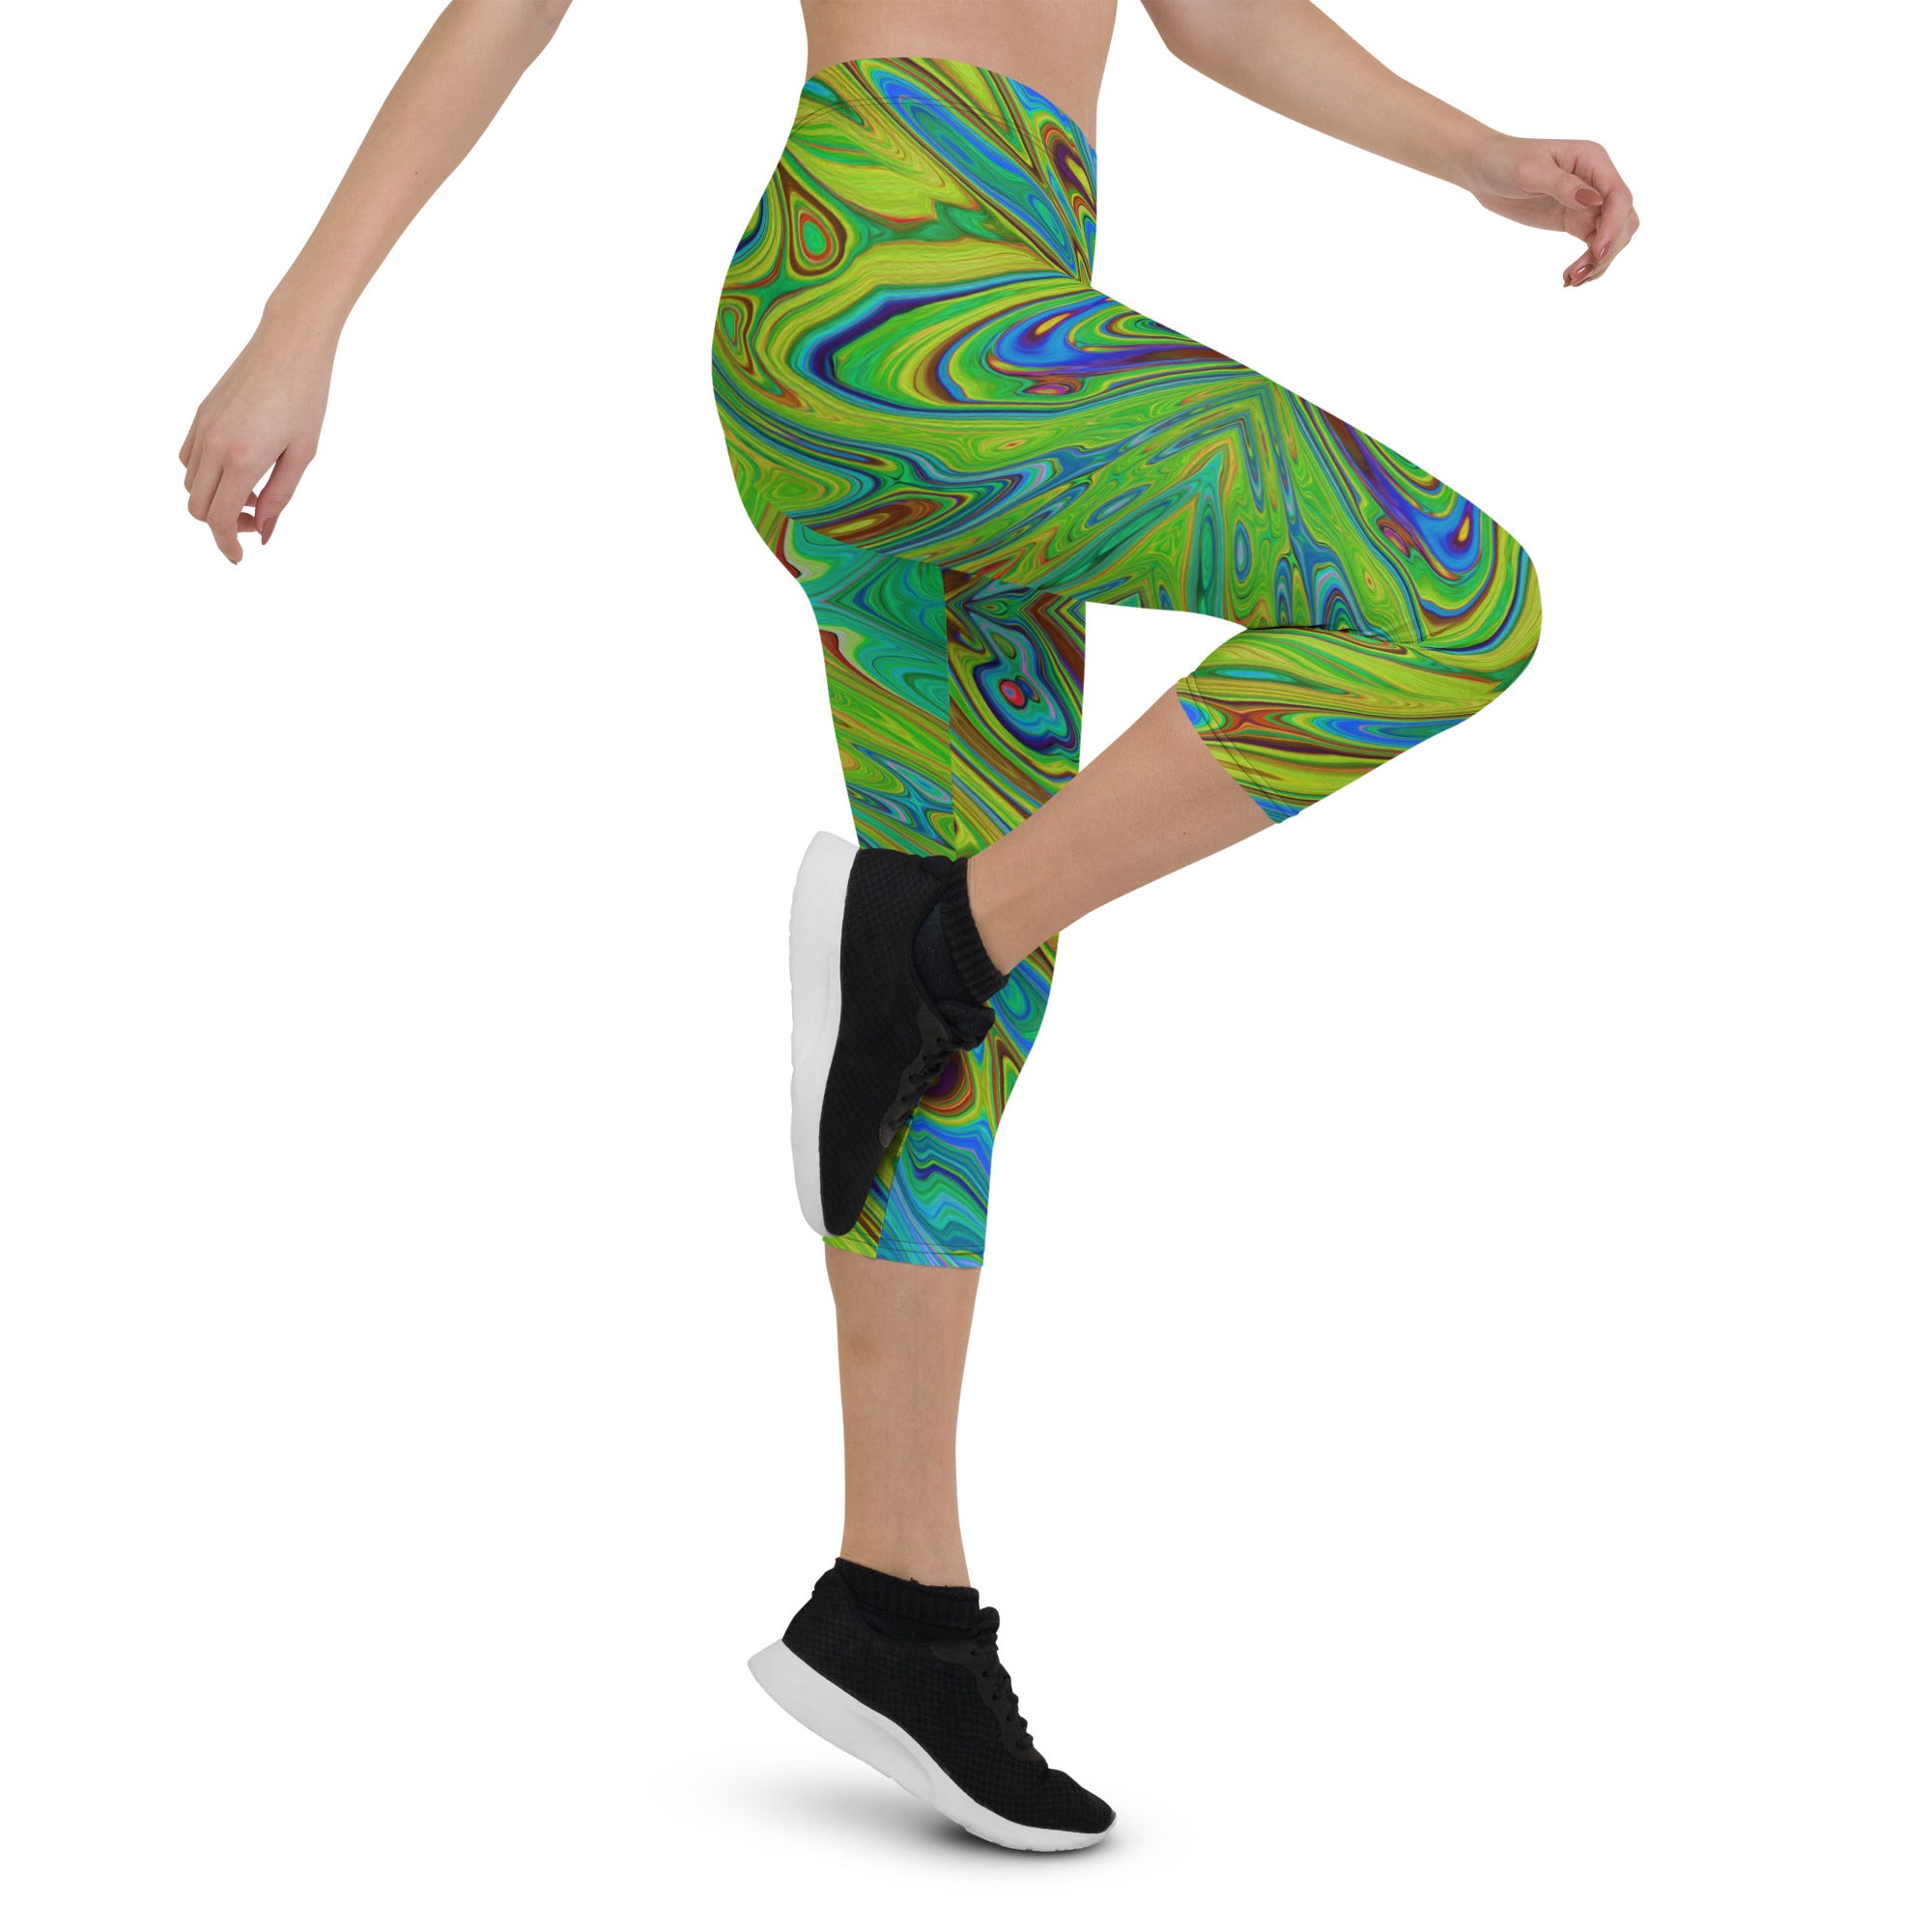 Capri Leggings, Trippy Chartreuse and Blue Abstract Butterfly